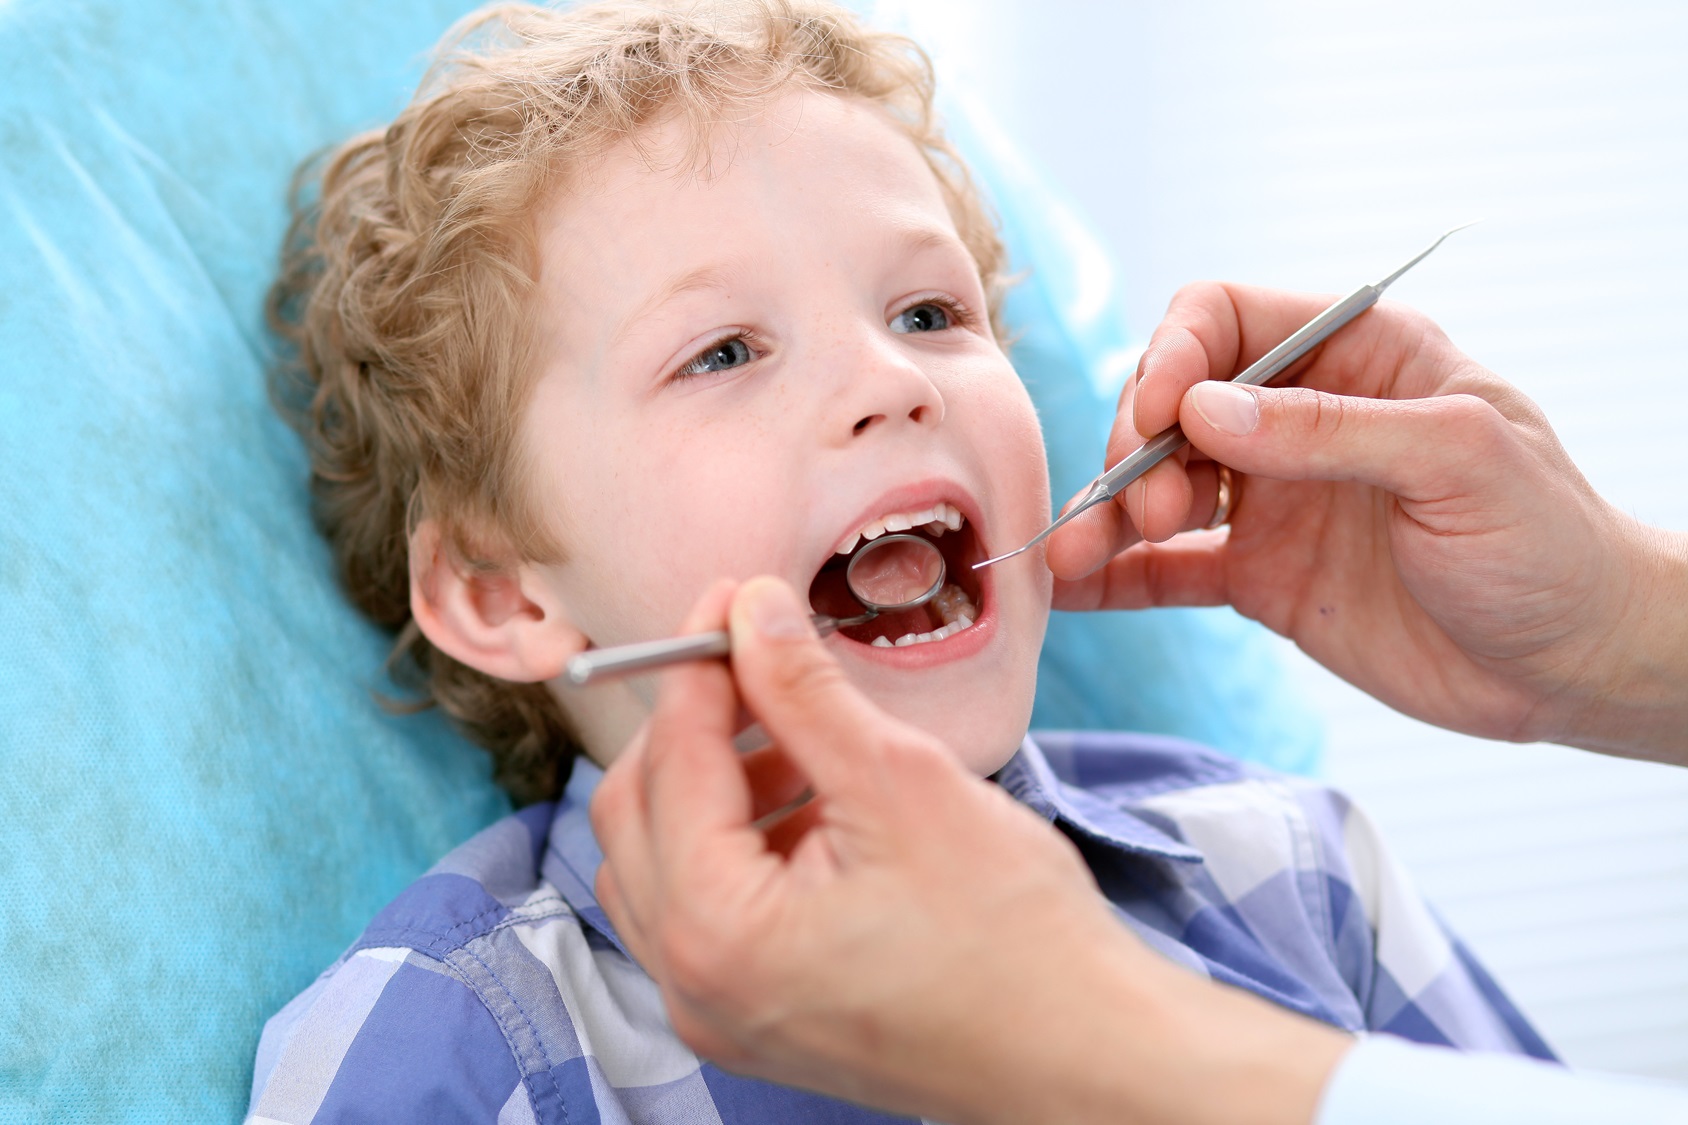 close-up-of-boy-having-his-teeth-examined-by-a-dentist